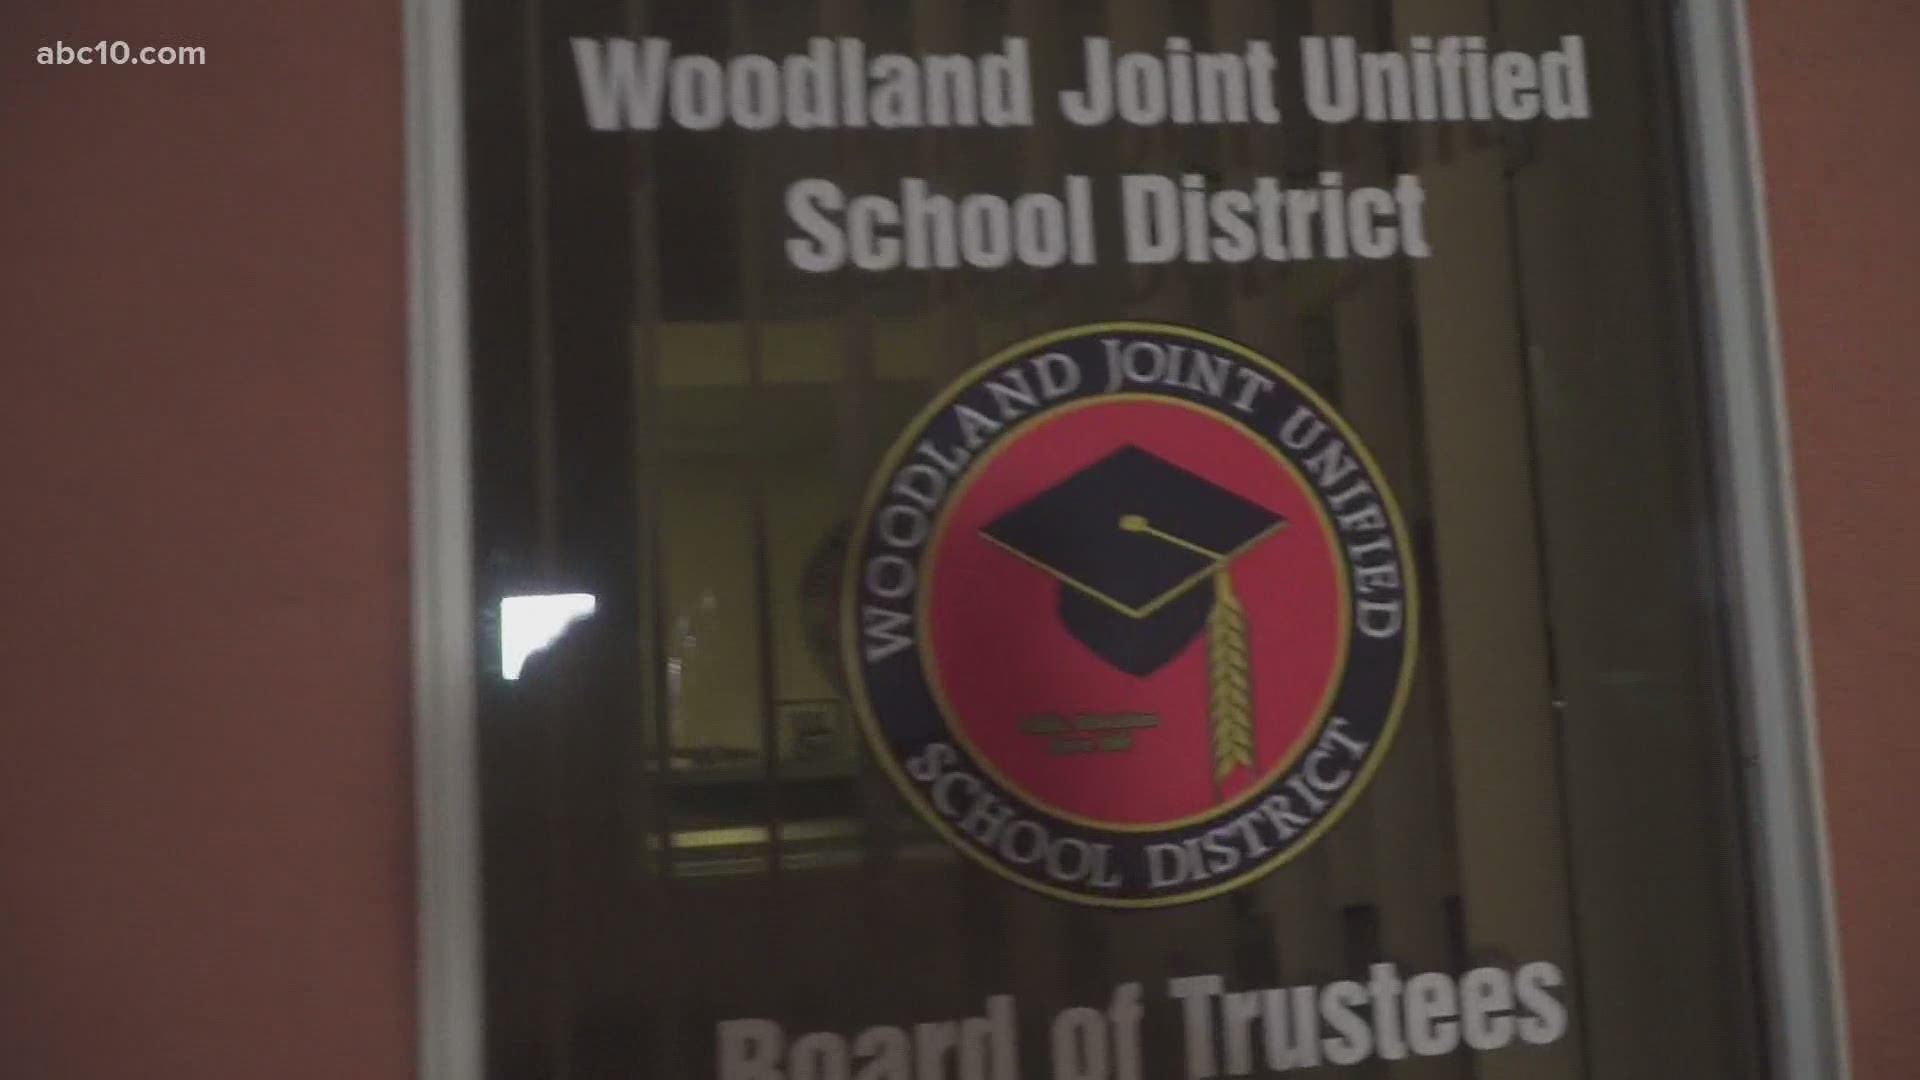 Teachers in the Woodland Joint Unified School District explain why they are demanding the option to teach distance learning from home.